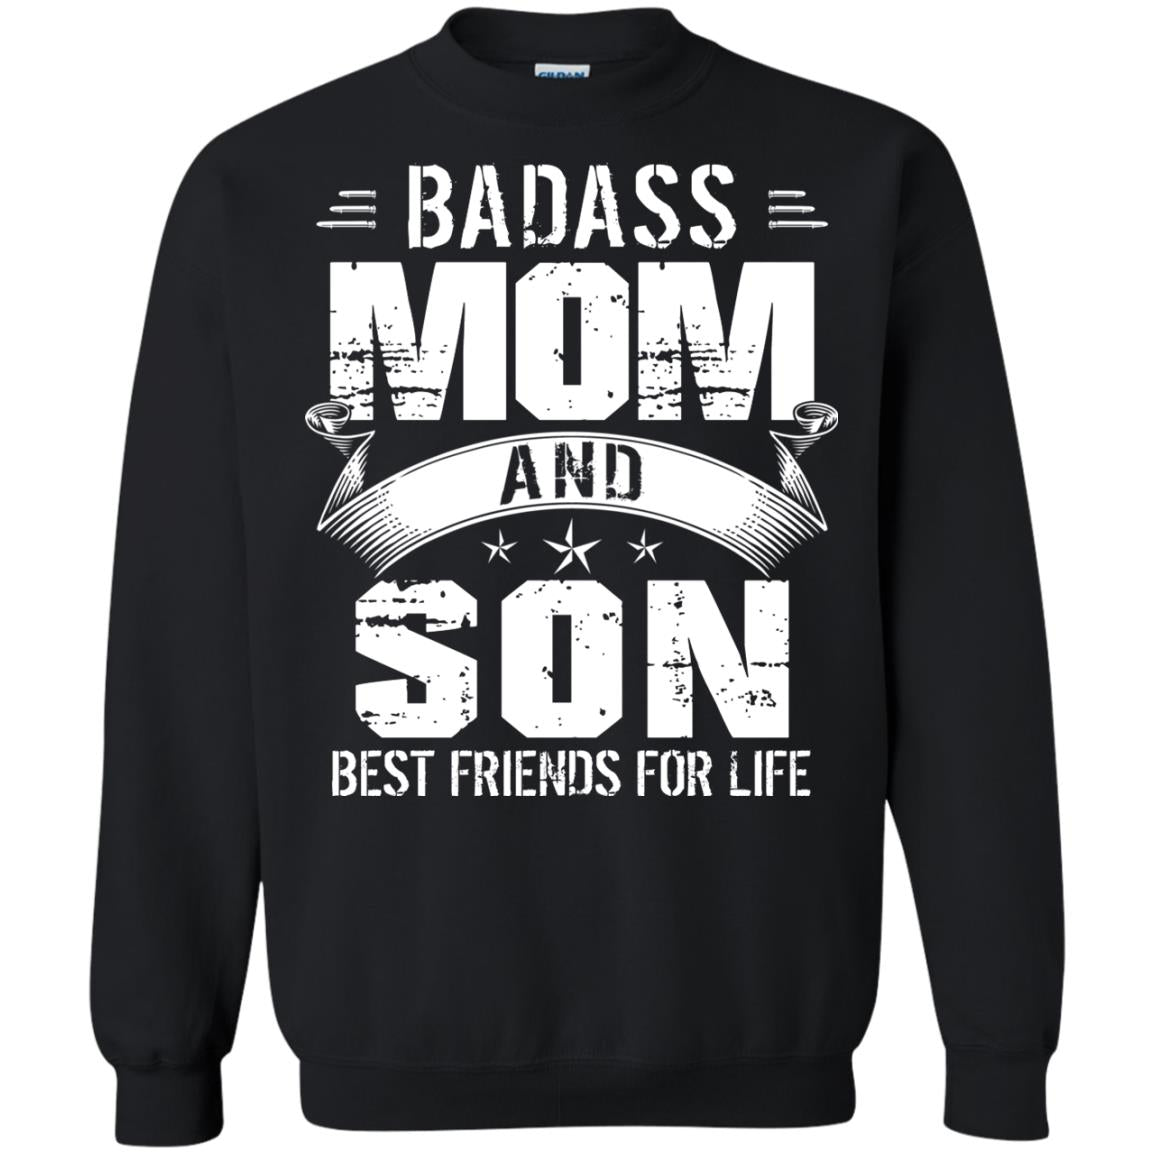 Badass Mom And Son Best Friends For Life Shirt